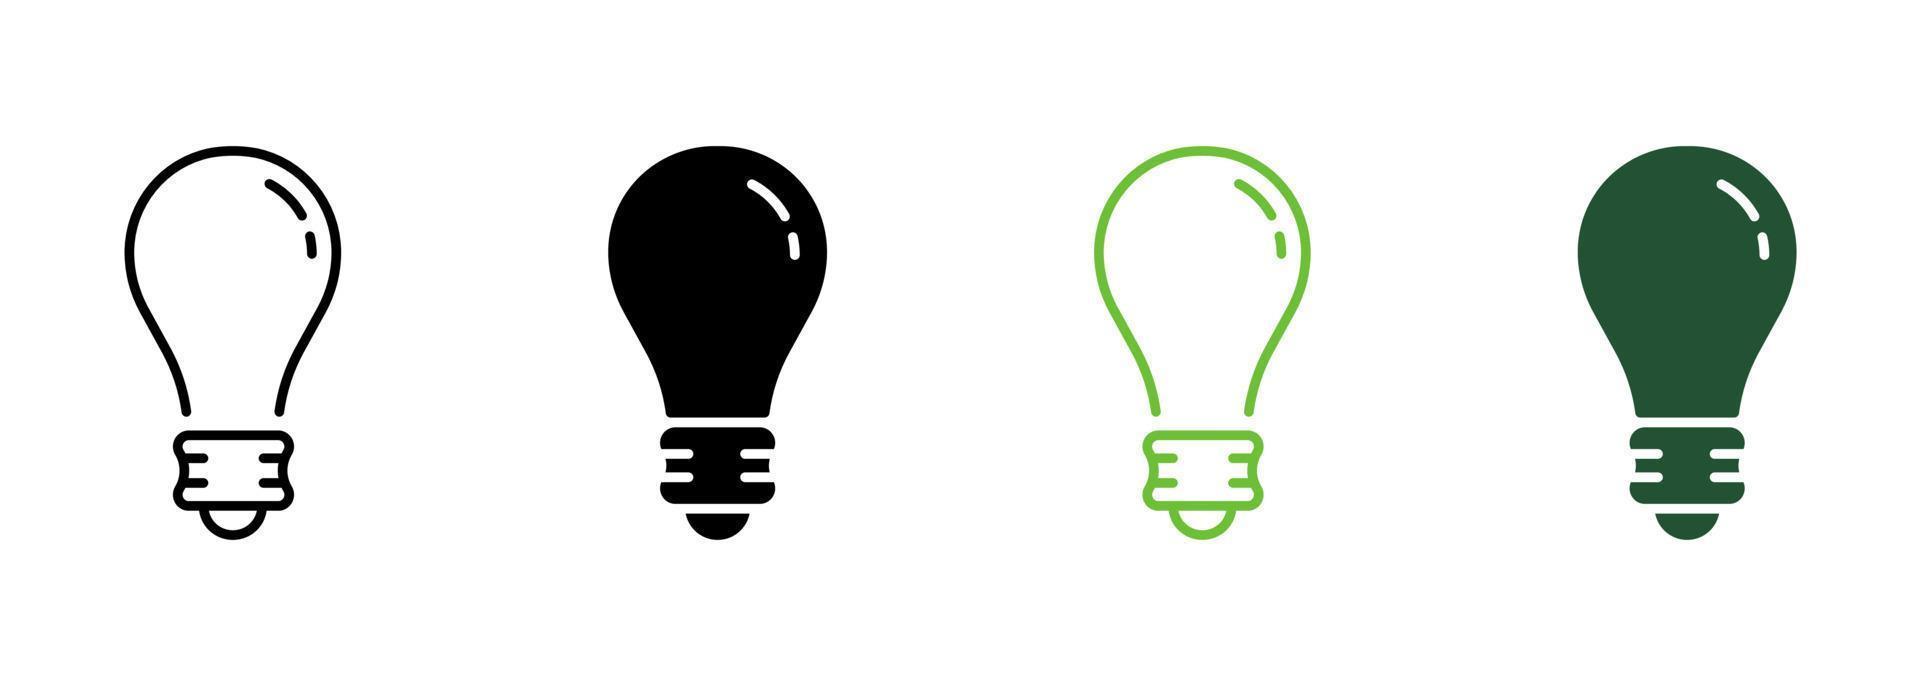 Lightbulb Low Energy Electricity Line and Silhouette Icon Set. Light Bulb Electric Energy Pictogram. Innovation, Inspiration, Think, Solution, Idea Lamp Concept Icon. Isolated Vector Illustration.